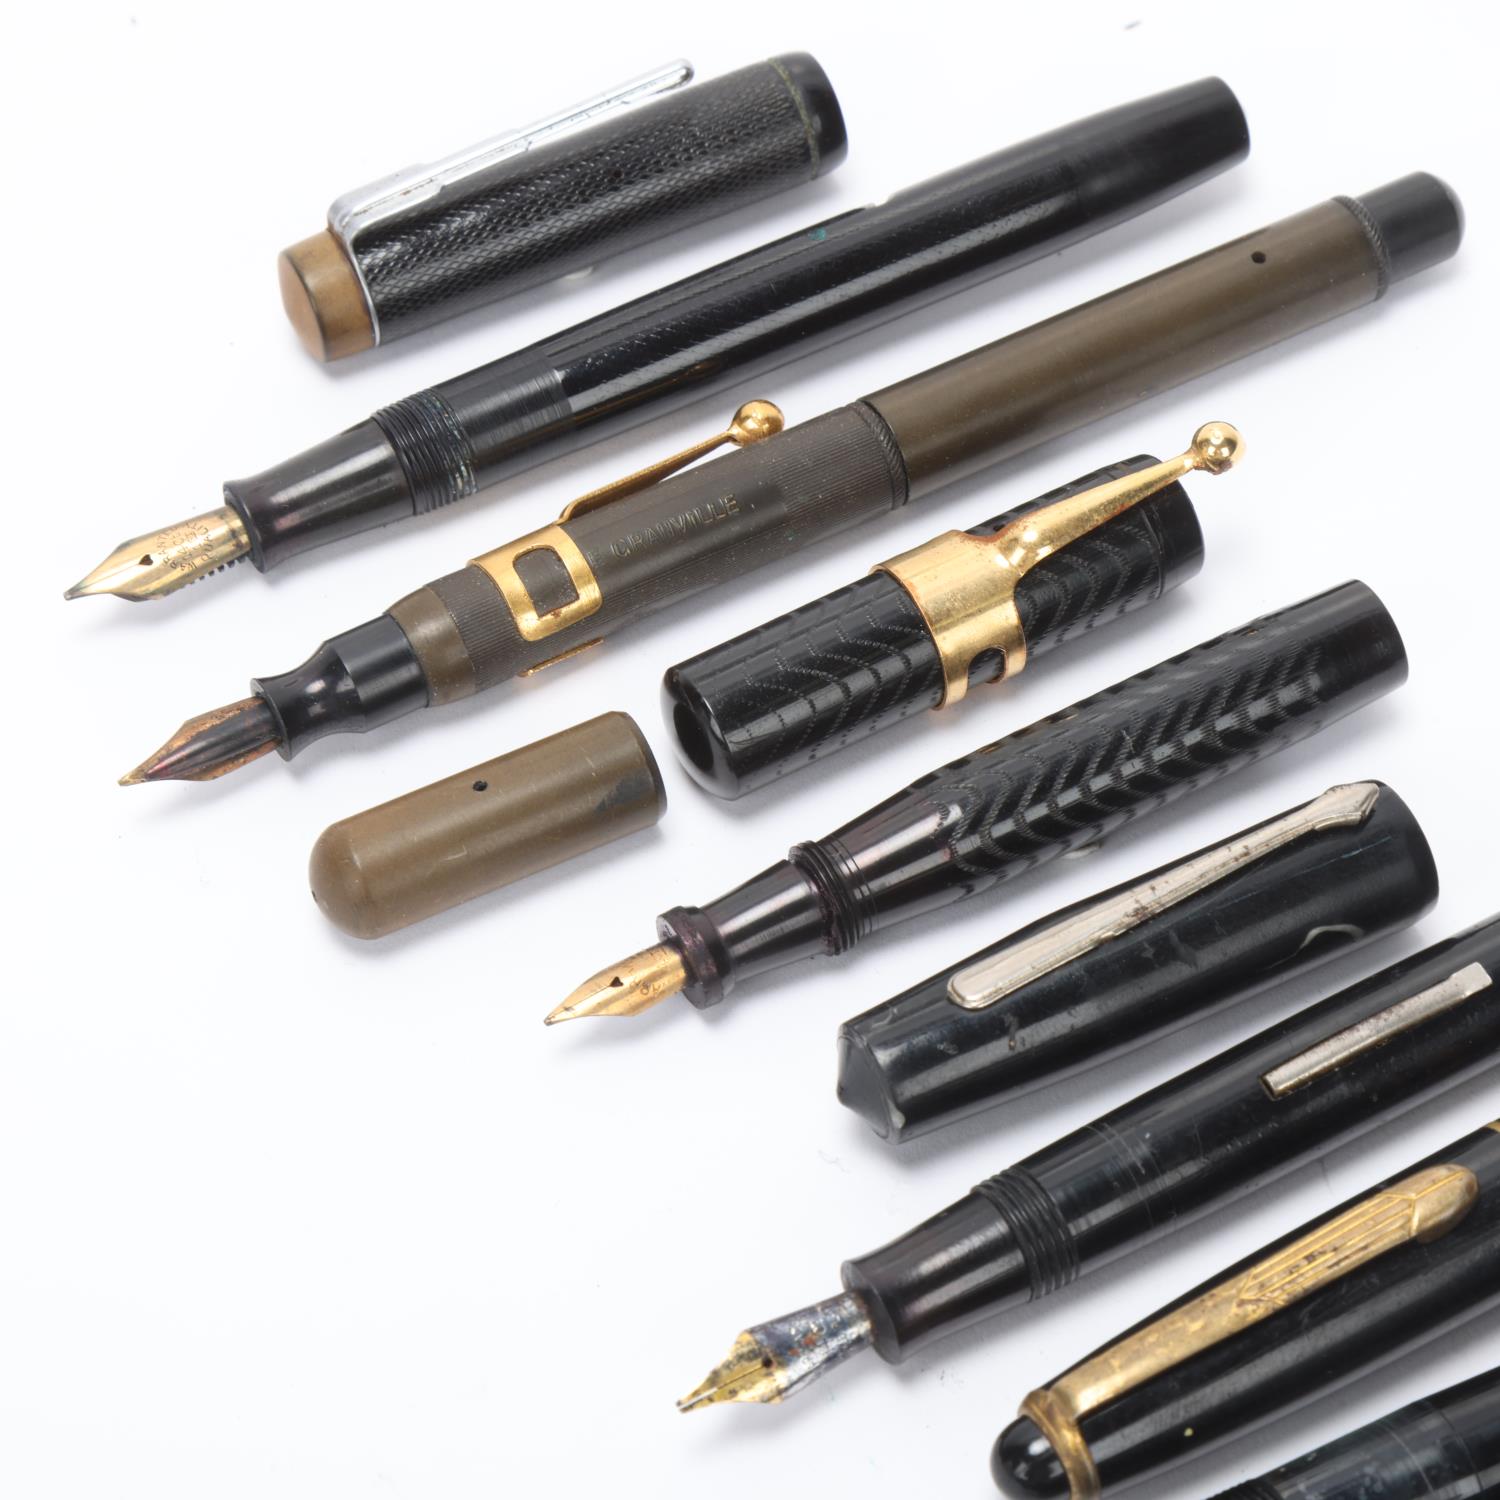 12 vintage fountain pens, including pens by Blackbird, Senator, Burnham, many with 14ct gold nibs - Image 4 of 4